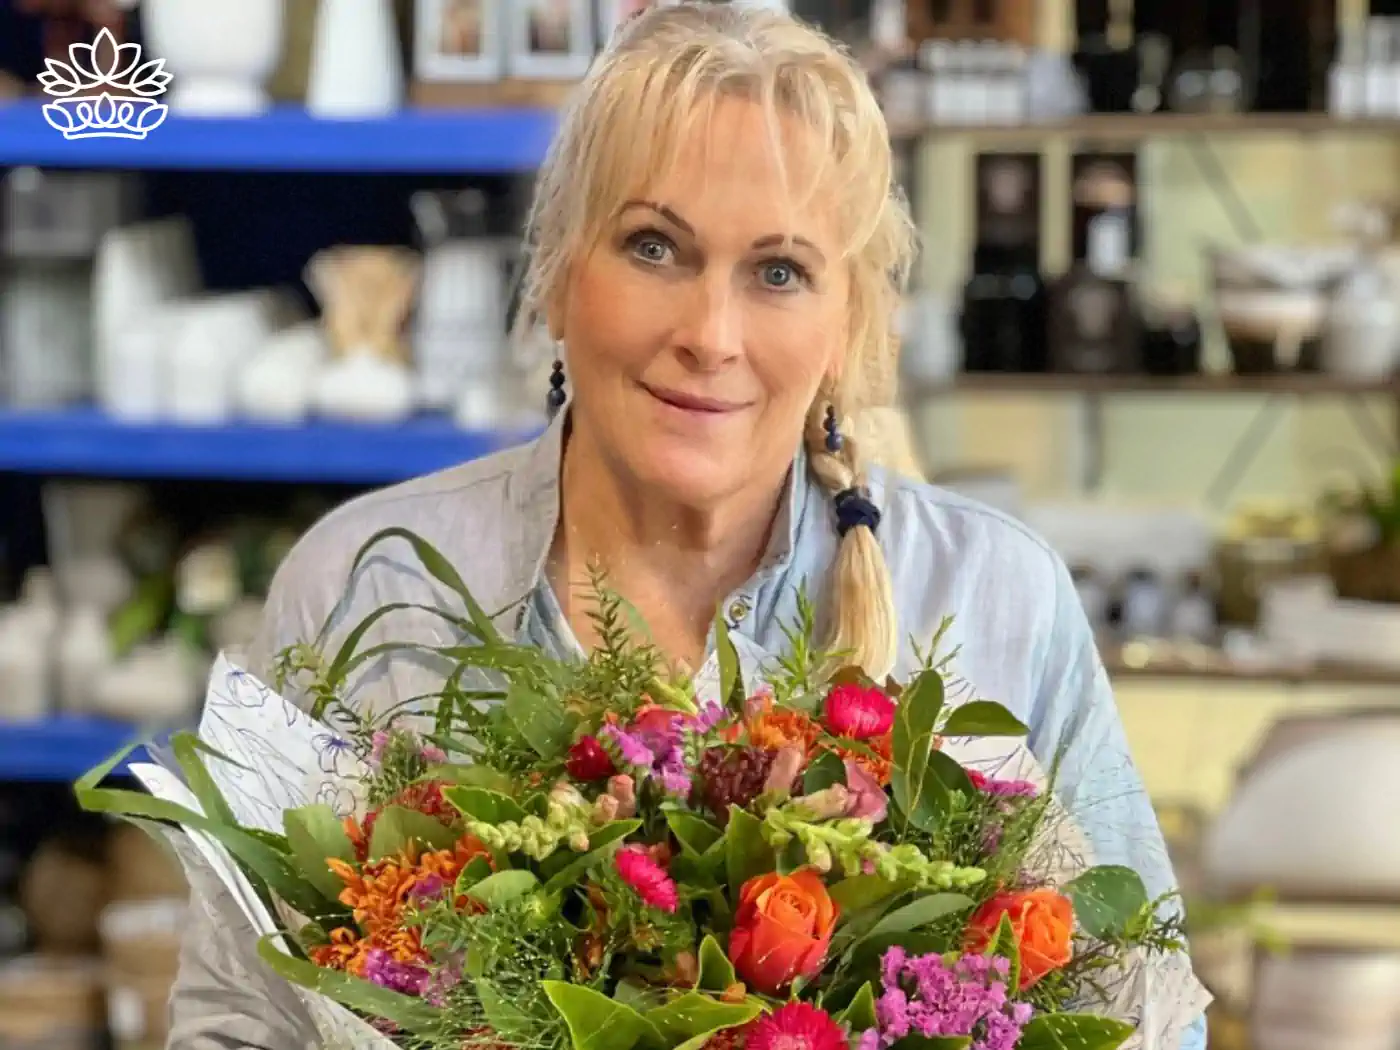 Florist presenting a vibrant bouquet with a warm smile, a bespoke creation from Fabulous Flowers and Gifts.